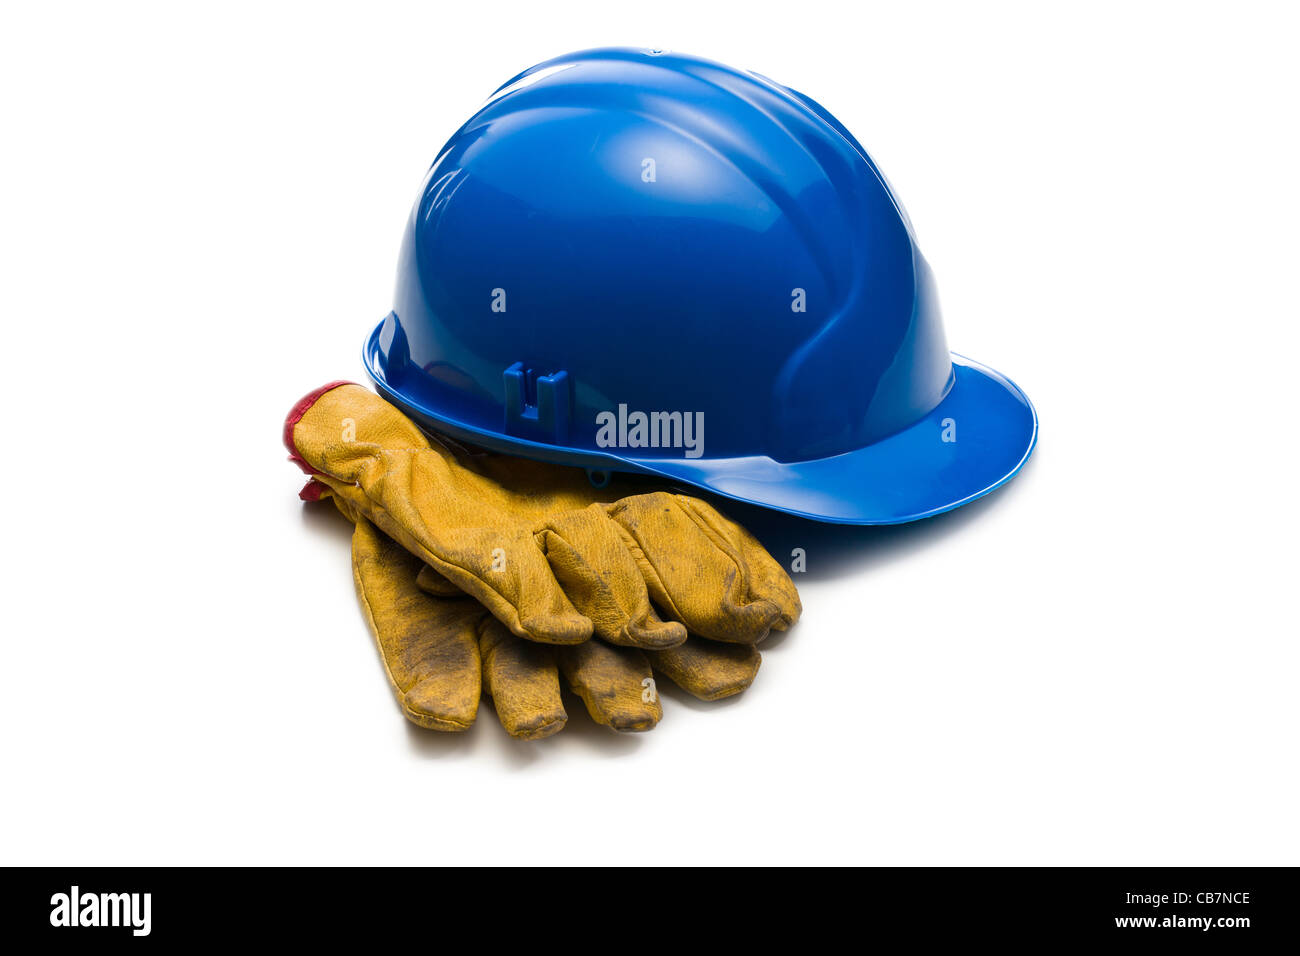 the blue hardhat and leather working gloves Stock Photo